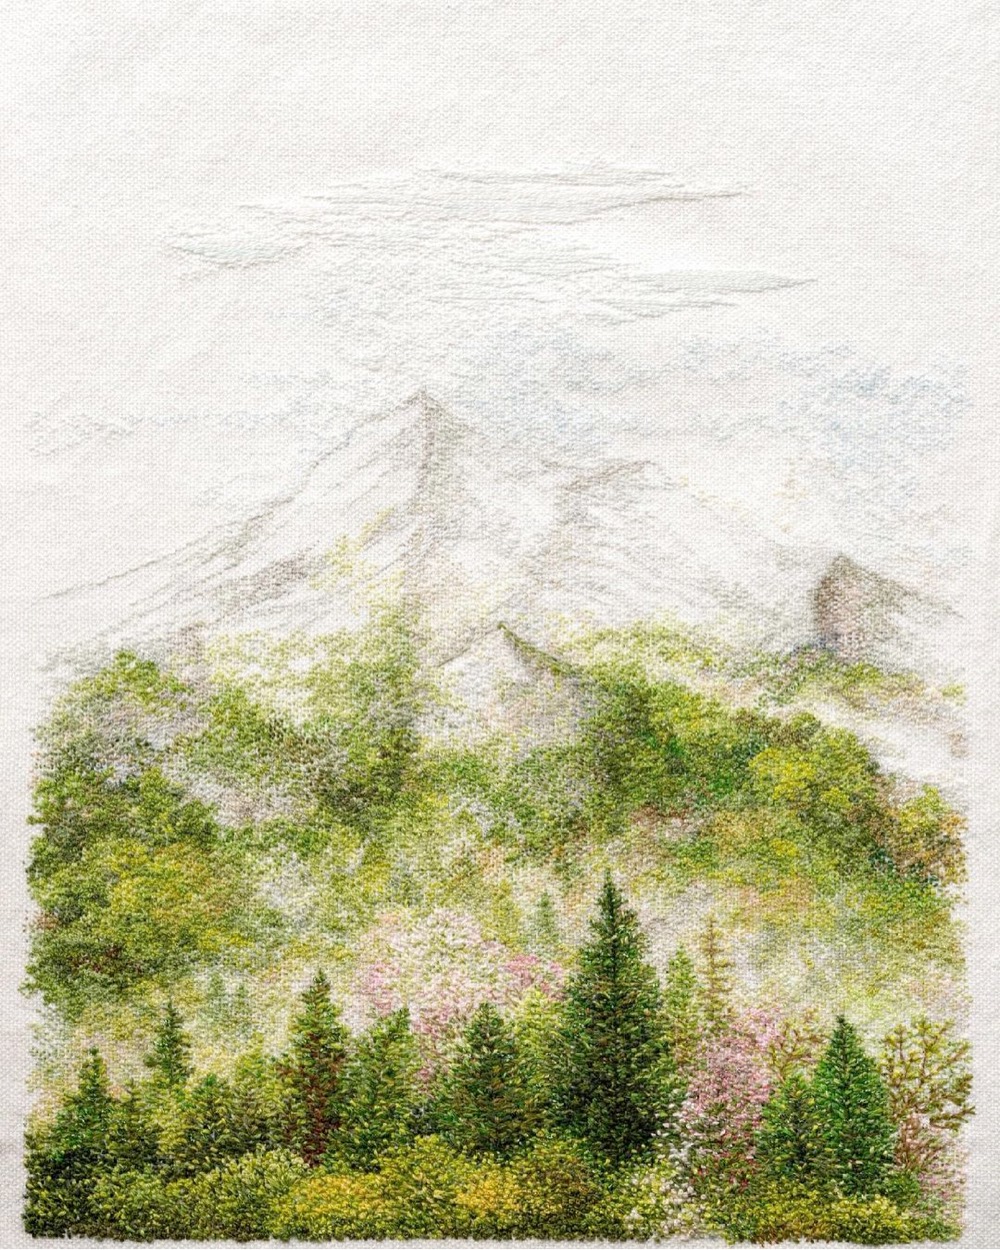 embroidered forest landscapes by Katrin Vates